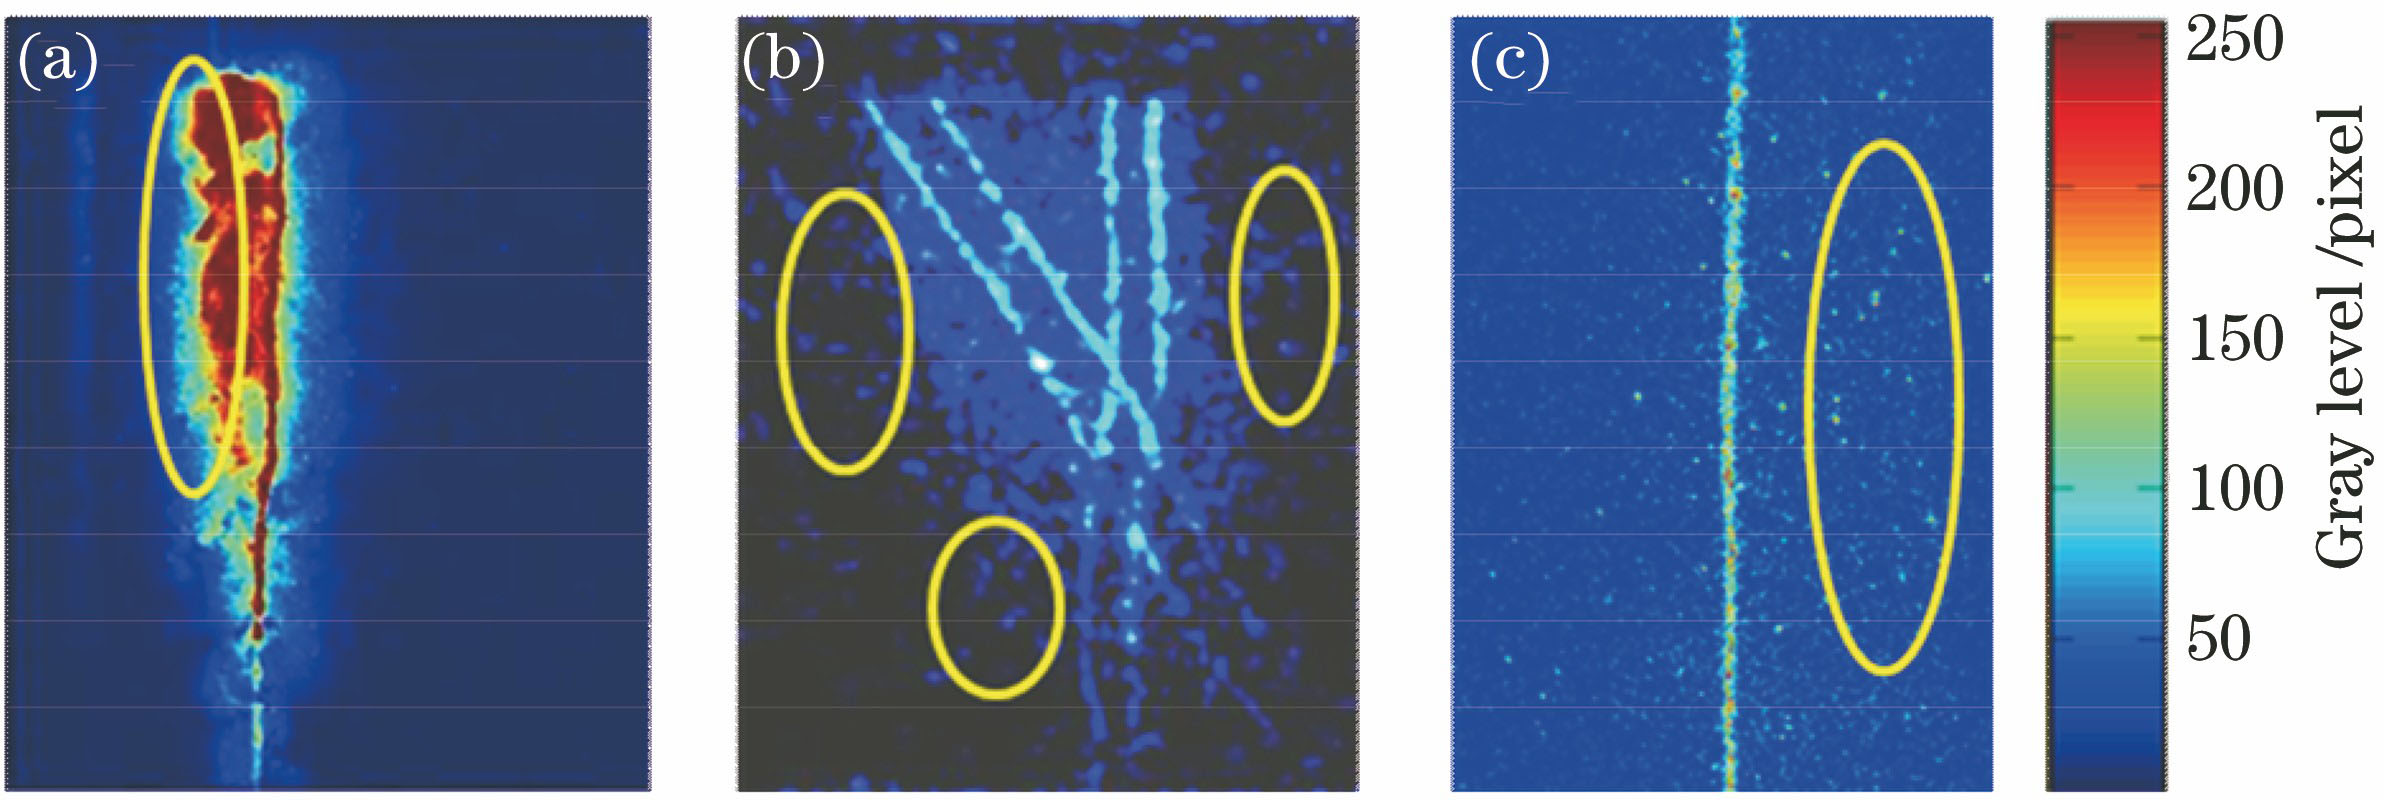 HTV experimental images. (a) OHB fluorescence interference; (b) flow field noise; (c) system noise